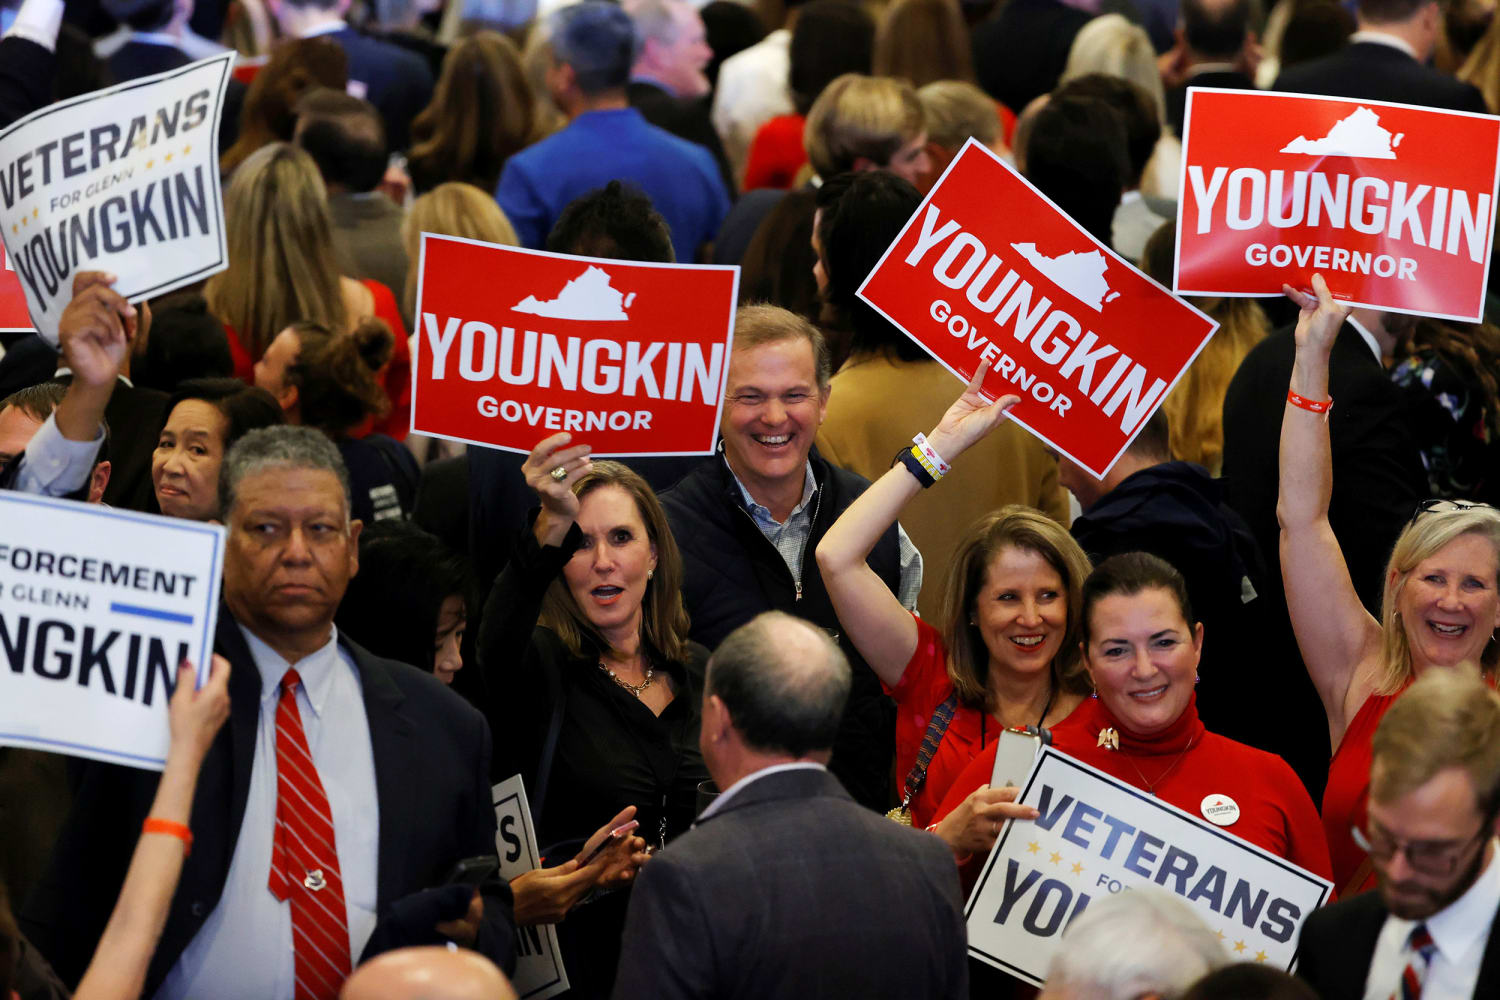 Democrats see lessons from Virginia defeat, but strategists worry the party isn’t learning